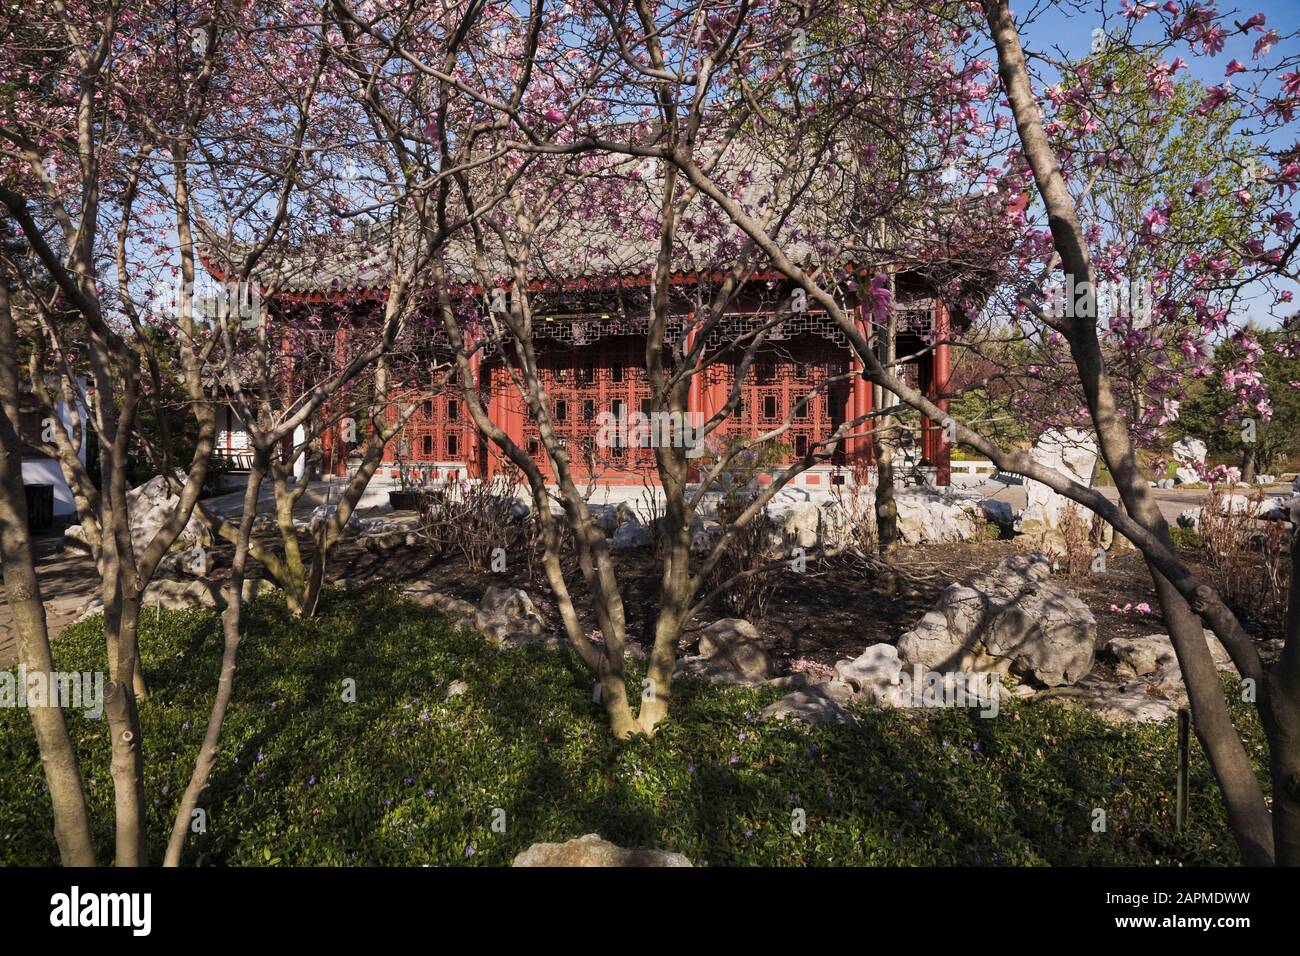 The Friendship Hall pavilion through Magnolia trees at the Chinese Garden in spring, Montreal Botanical Garden, Quebec, Canada Stock Photo